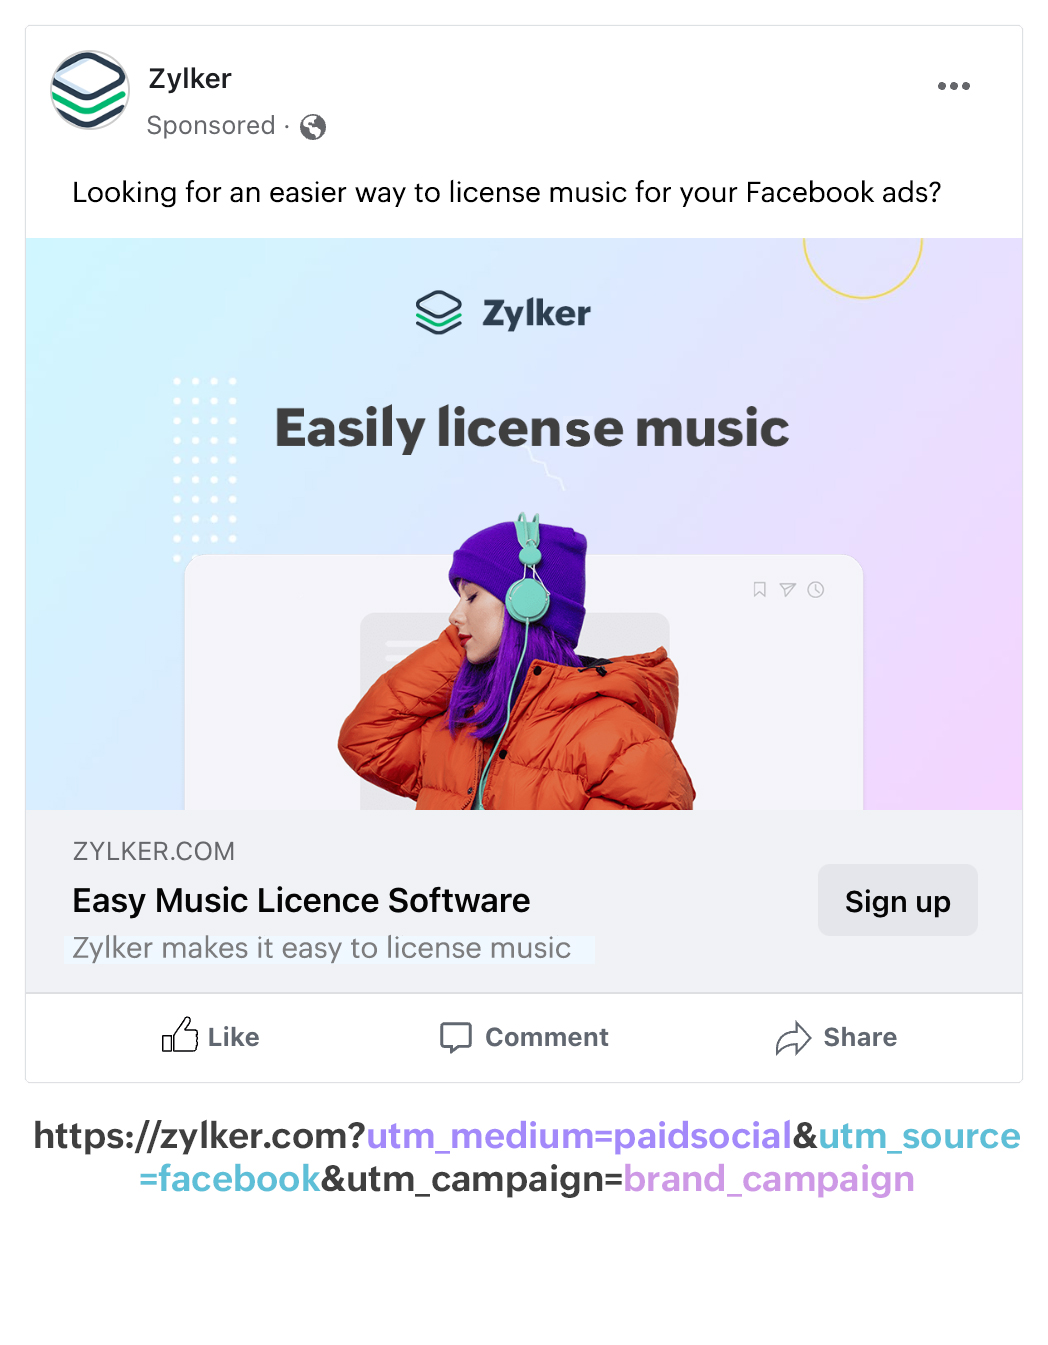 "Screenshot of a sponsored ad on Facebook for Zylker, along with the UTM codes"